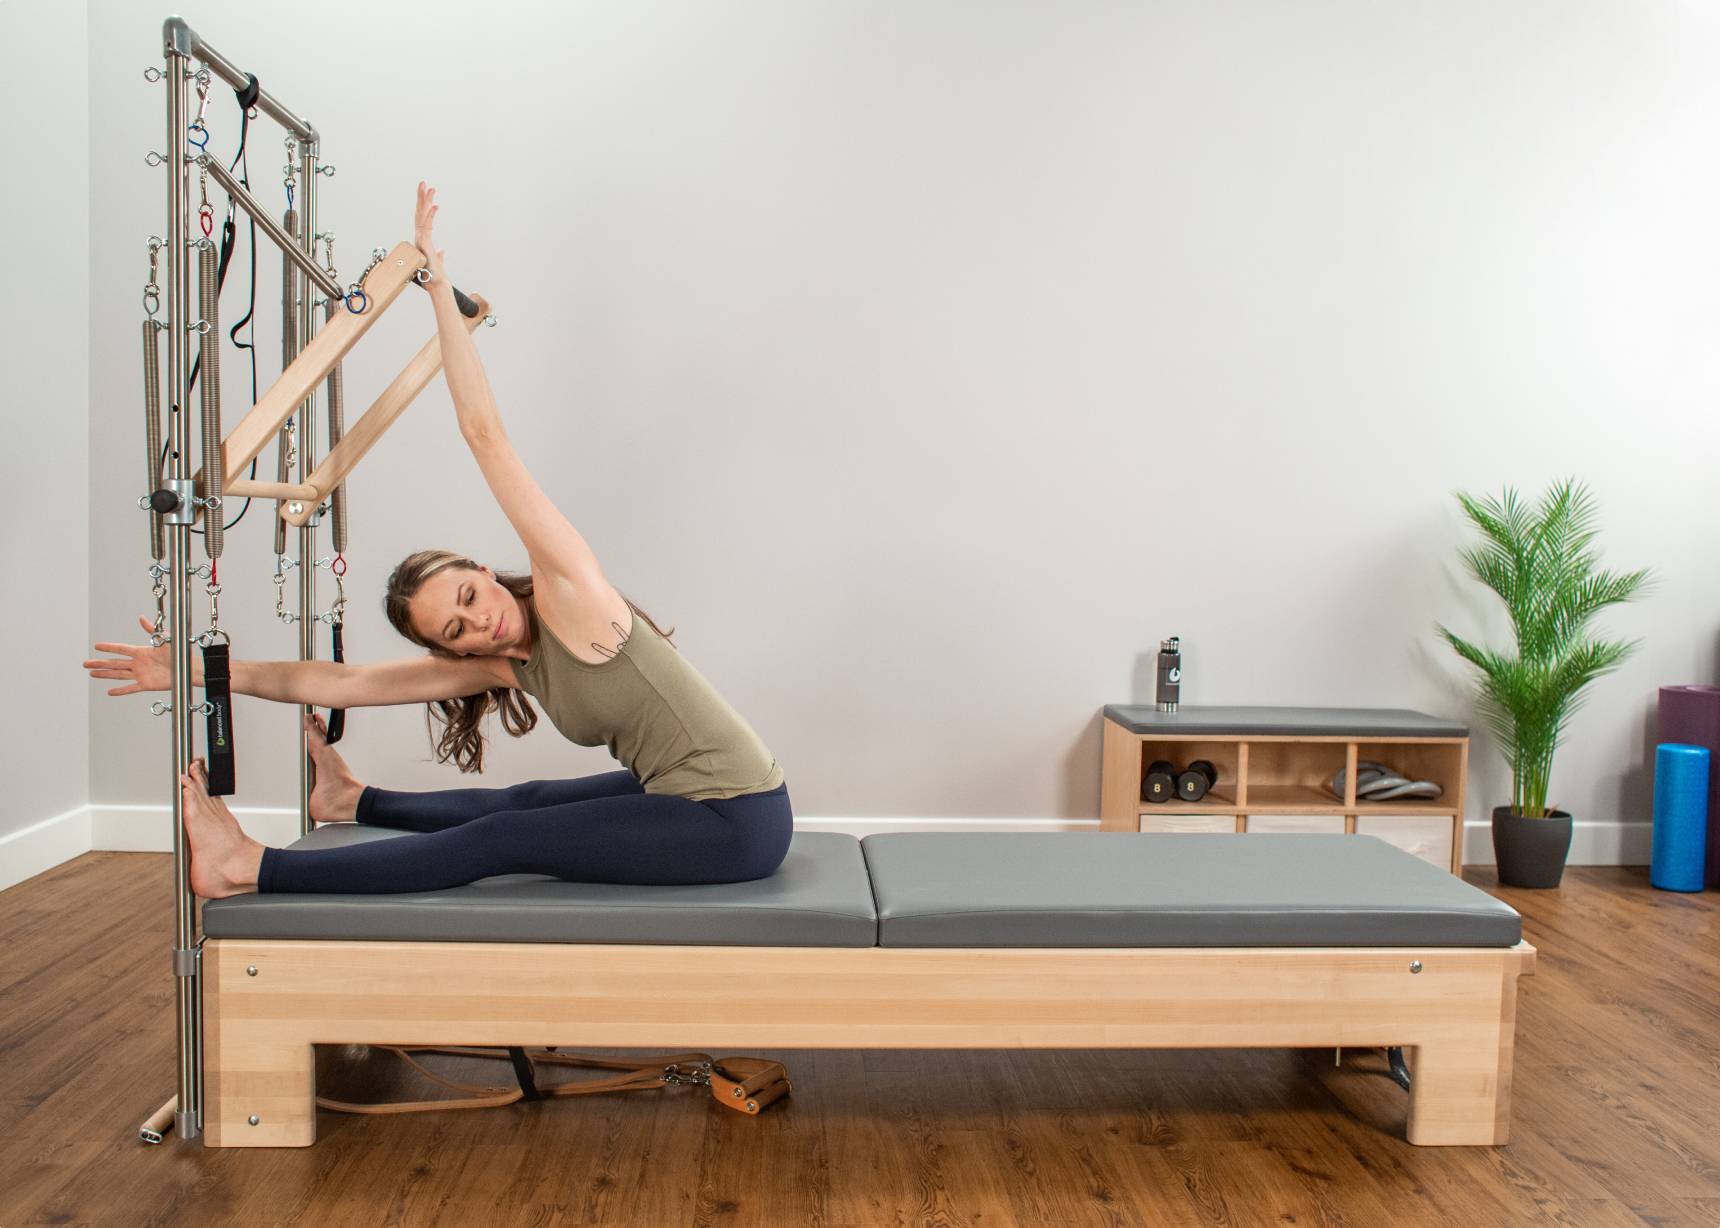 Buy Pilates Reformer Bed - The Core Collab USA - Medium